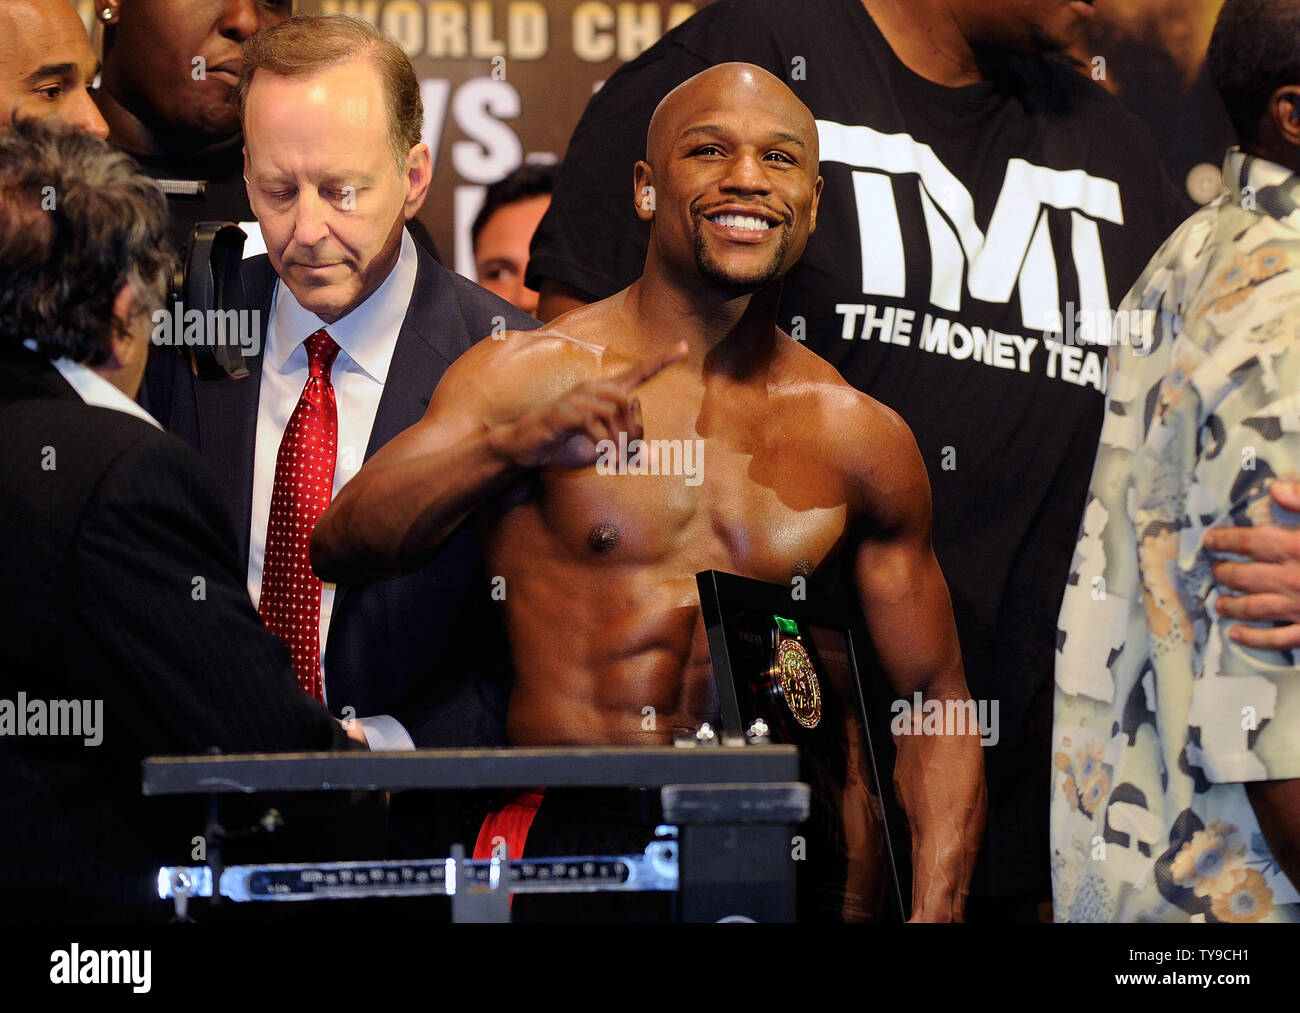 Boxer Floyd Mayweather weighs in at 146 pounds for his fight against Robert Guerrero for the WBC and Vacant Ring Magazine Welterweight titles at the MGM Grand Garden Arena in Las Vegas, Nevada on May 3, 2013. UPI/David Becker Stock Photo